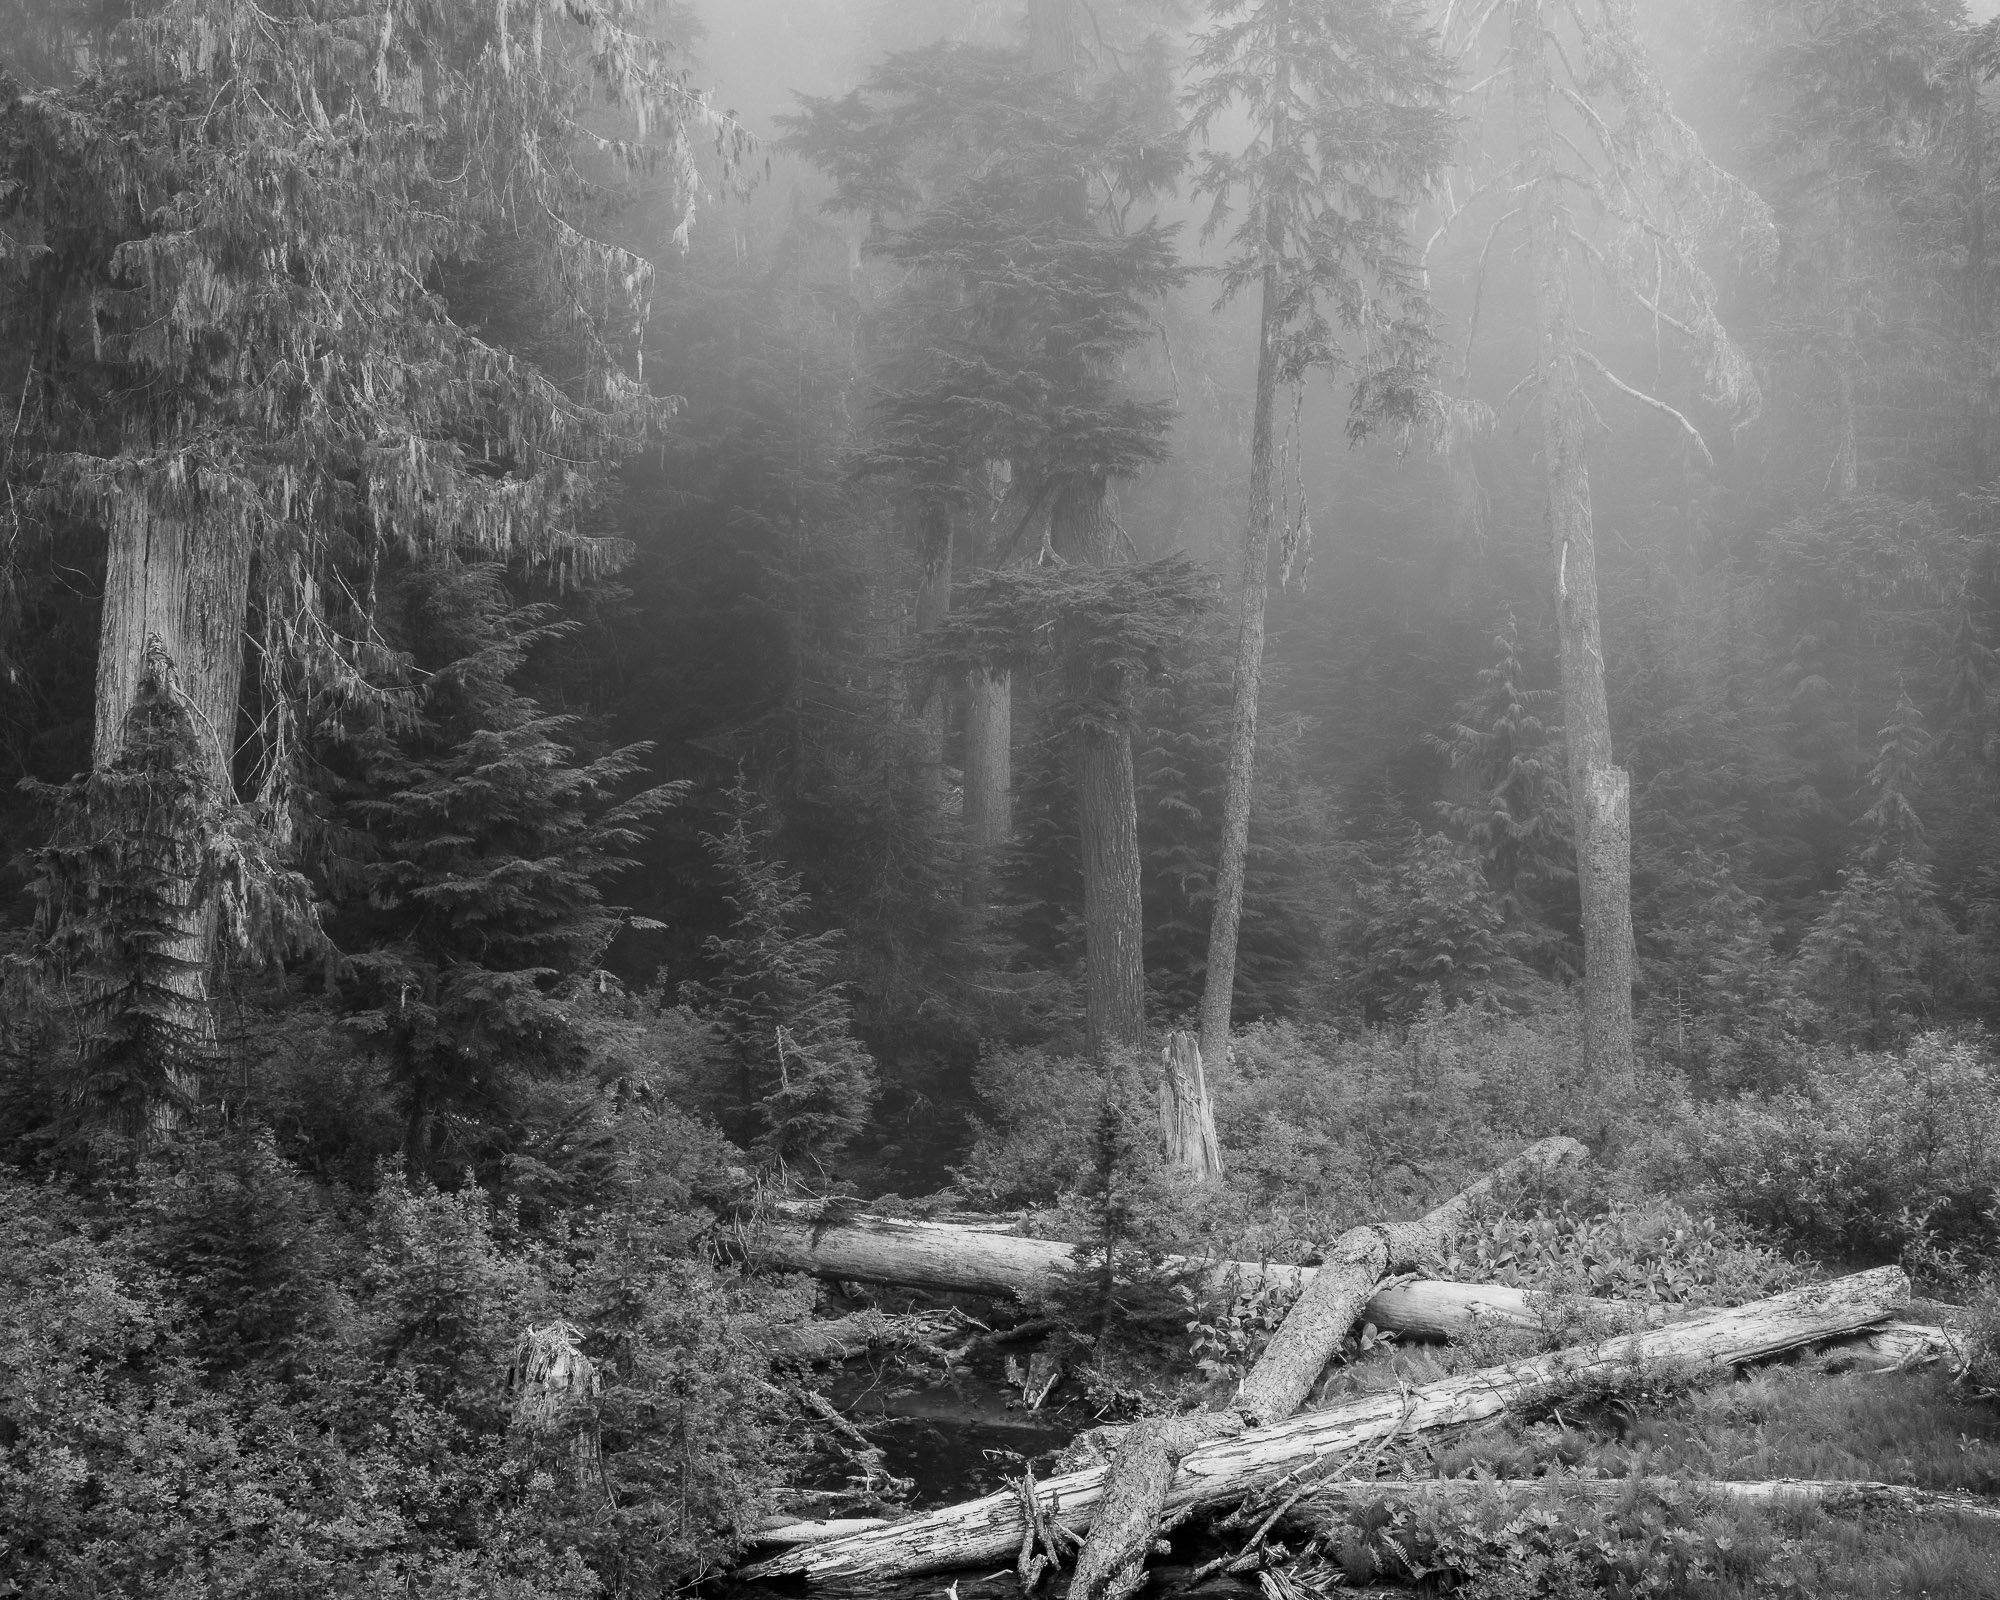 A black and white intimate landscape photograph of a misty forest scene along Huckleberry Ridge near Greenwater, Washington.